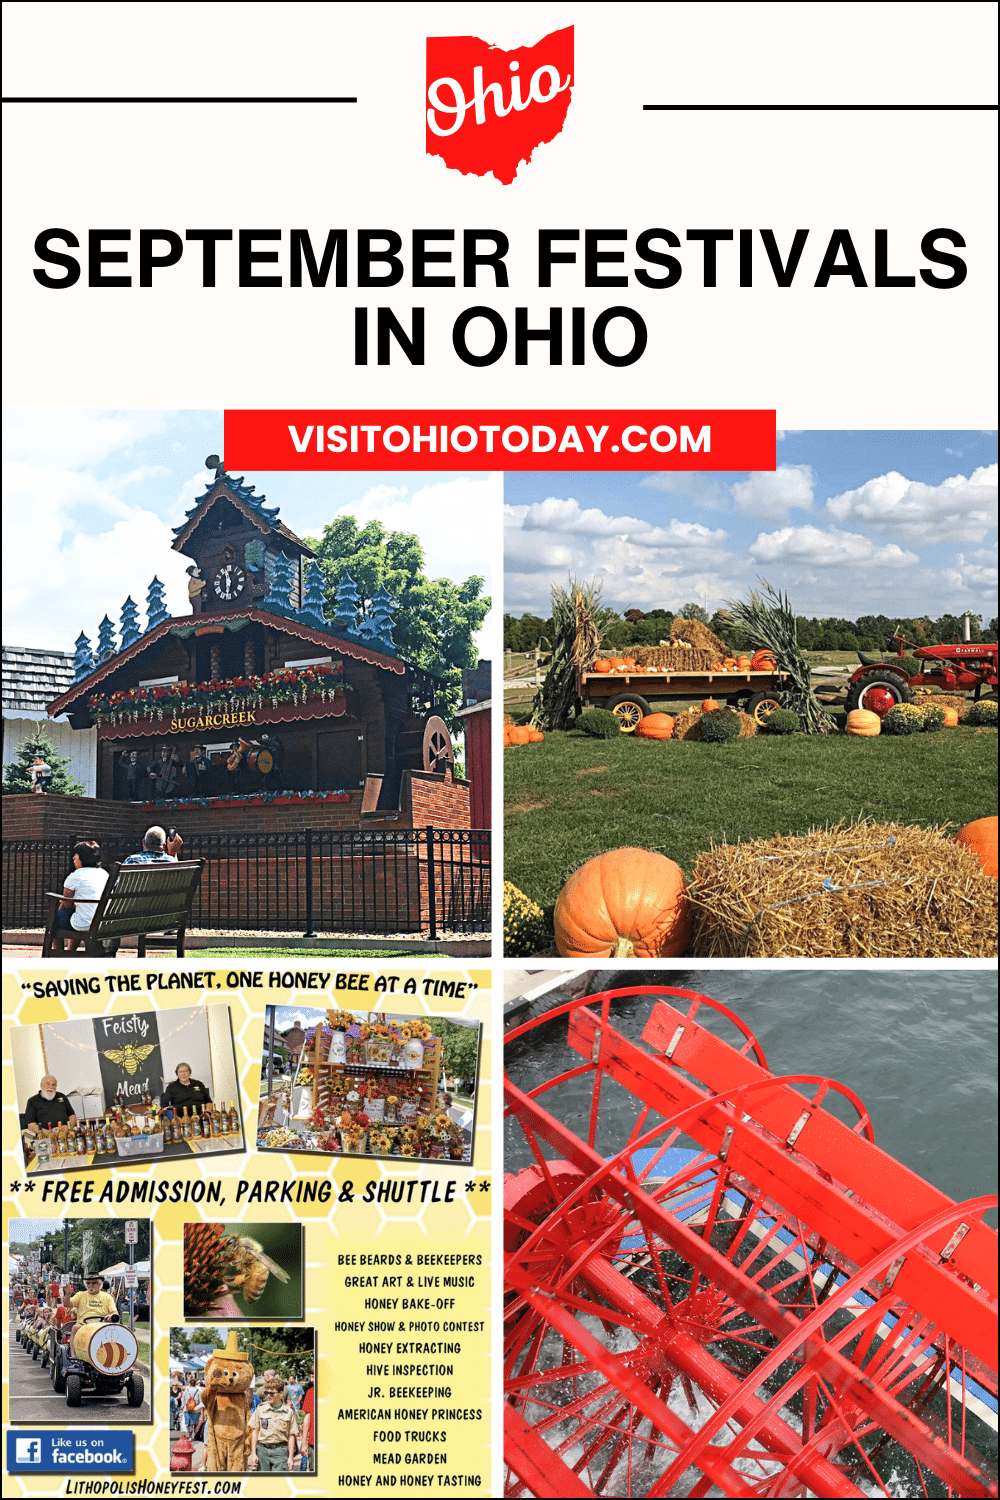 Are you looking for some fun activities to do in September? Our list of September Festivals in Ohio has many exciting events to choose from!